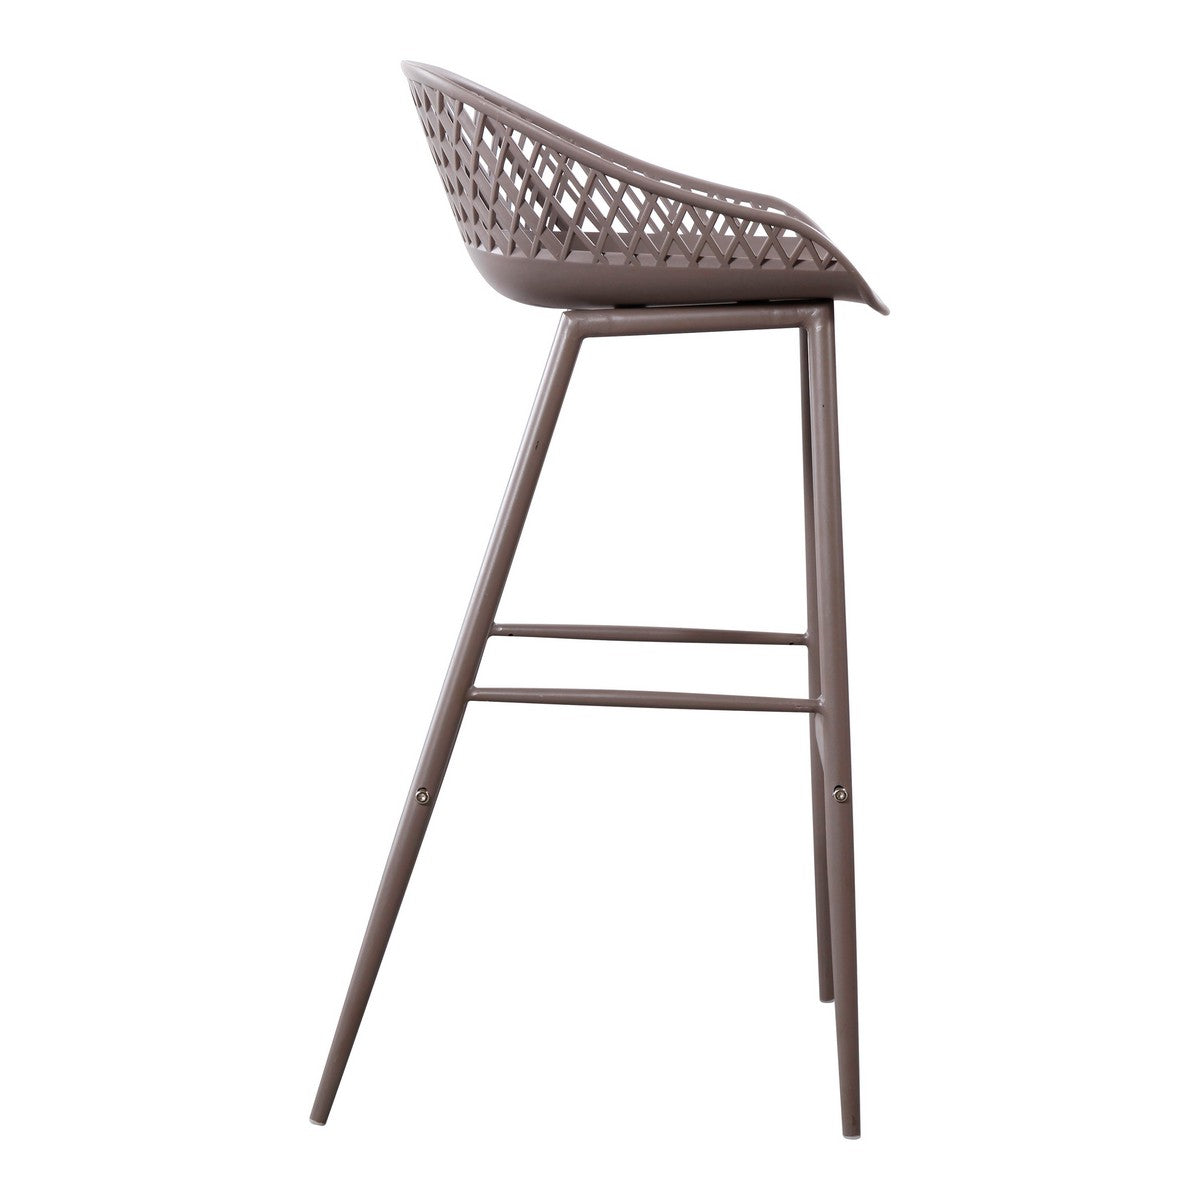 Moe's Home Collection Piazza Outdoor Barstool Grey-Set of Two - QX-1004-15